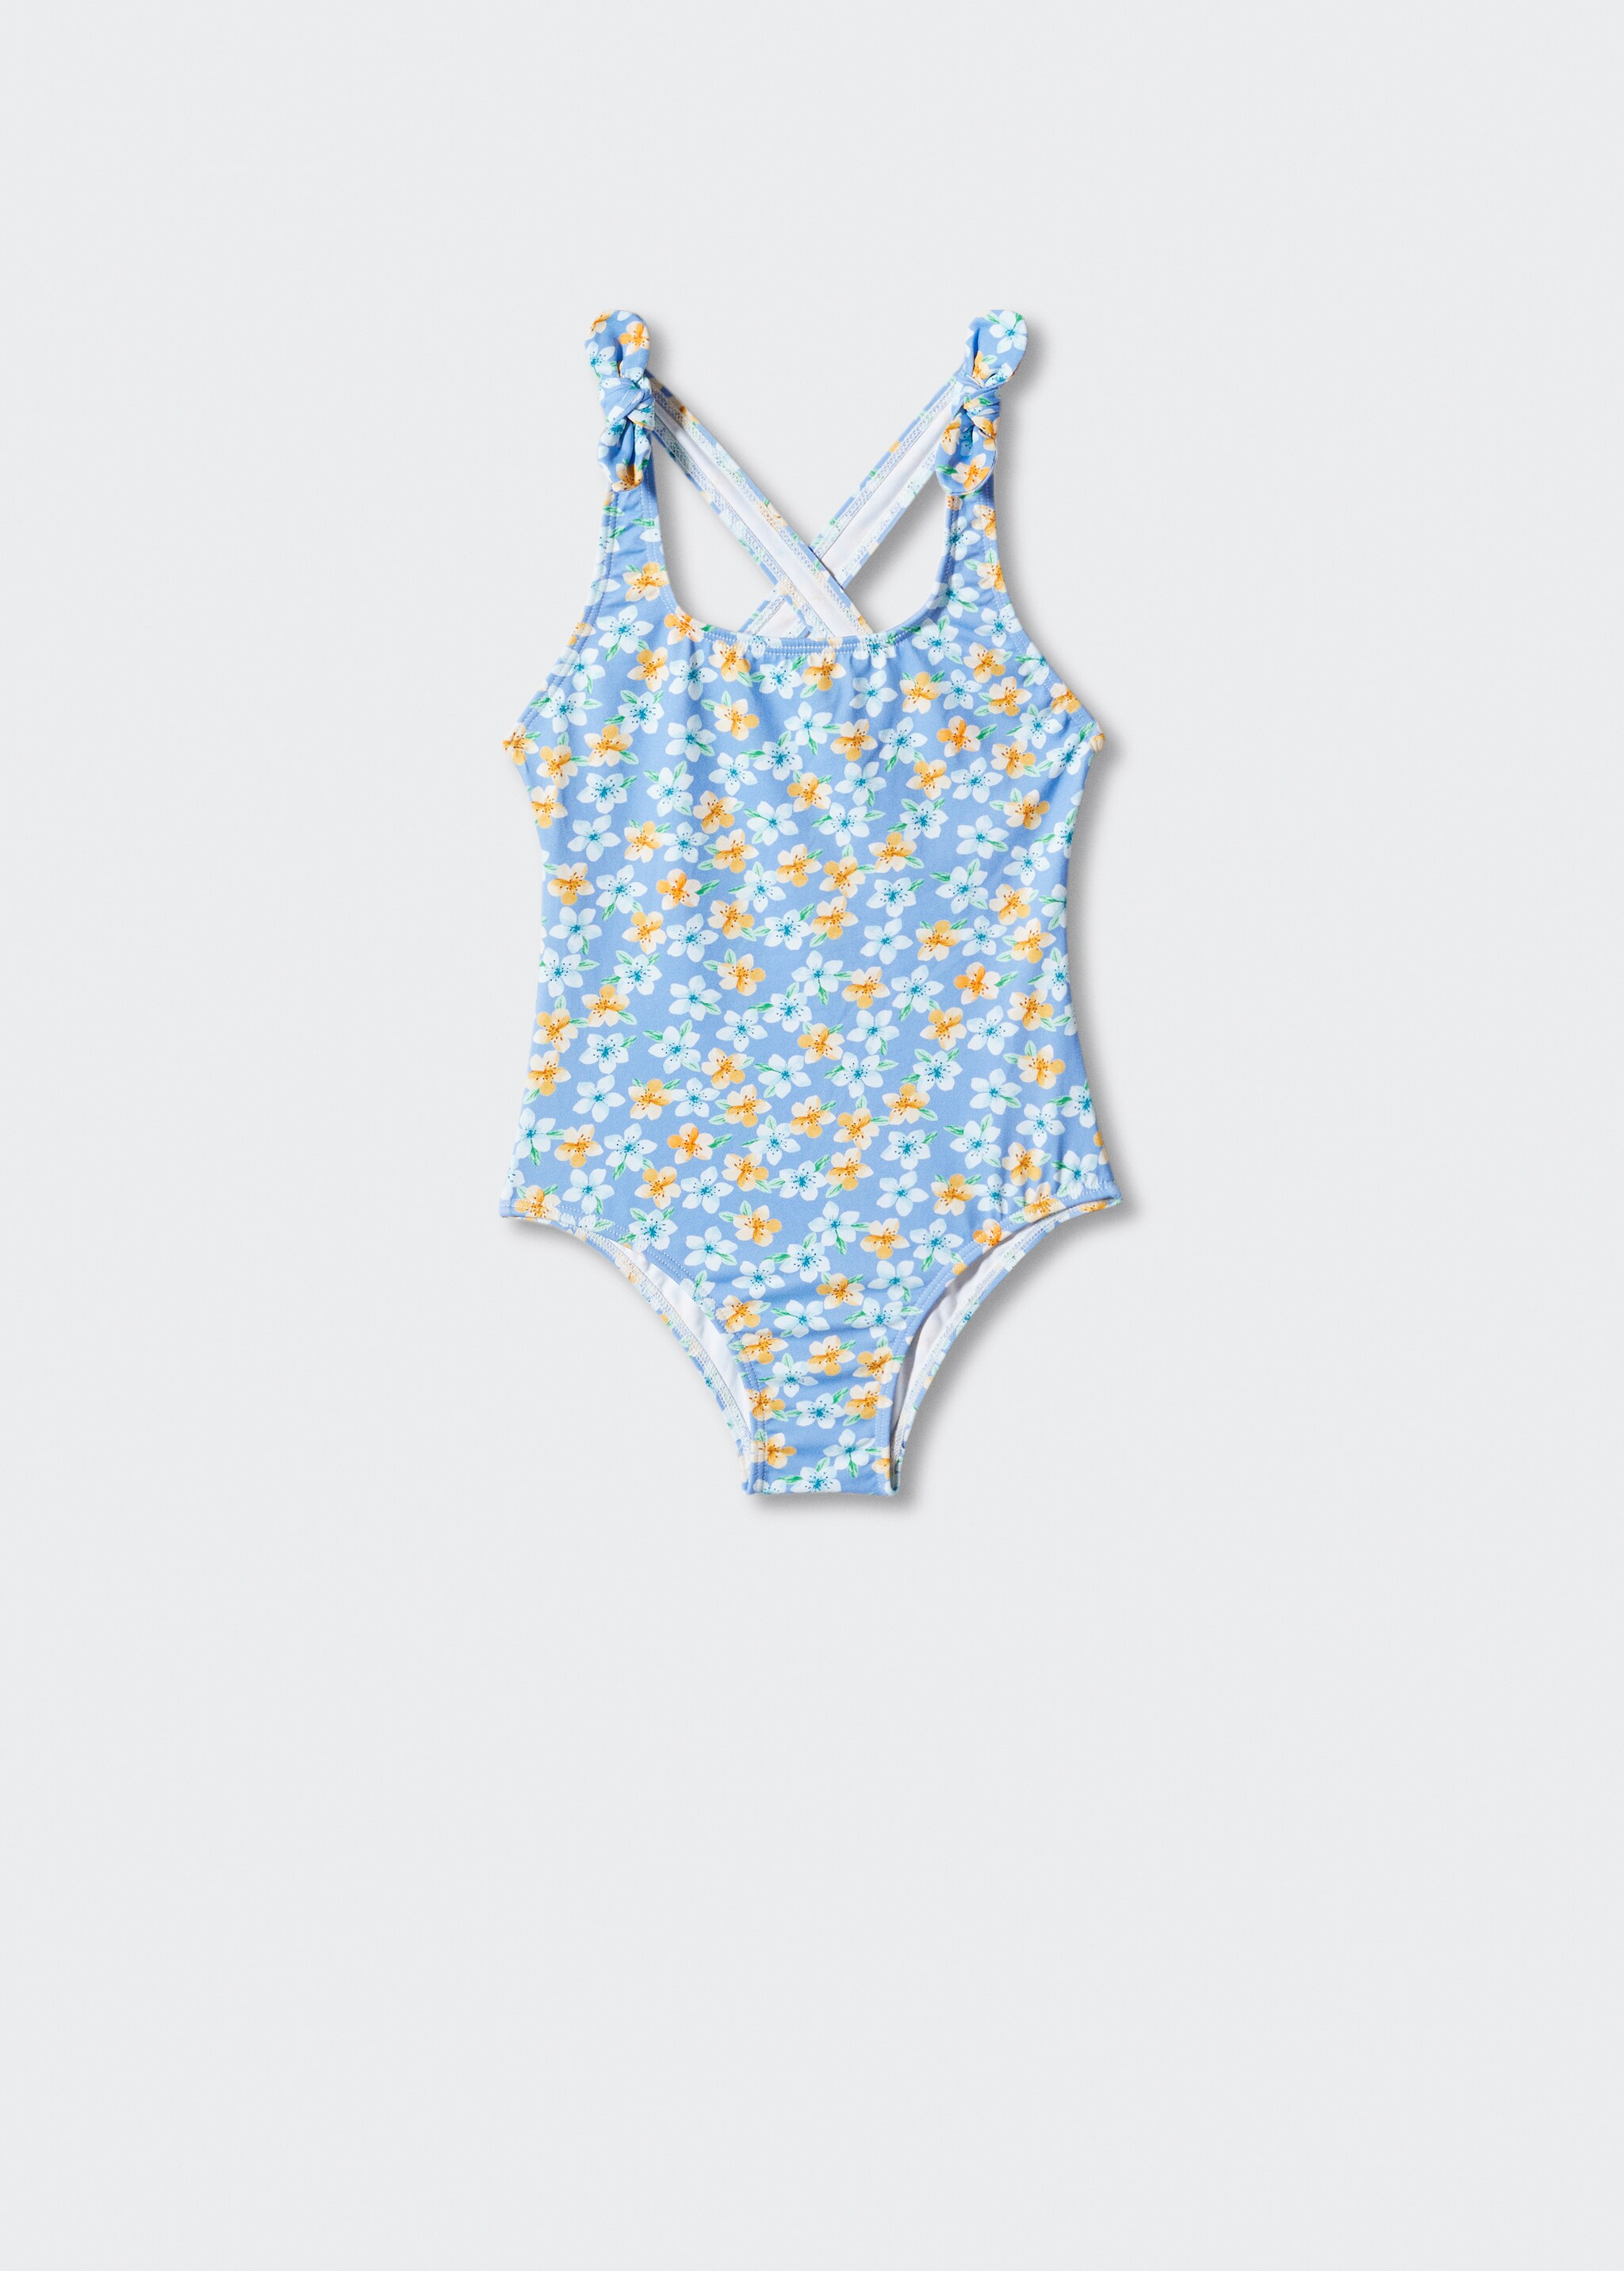 Floral print swimsuit - Article without model